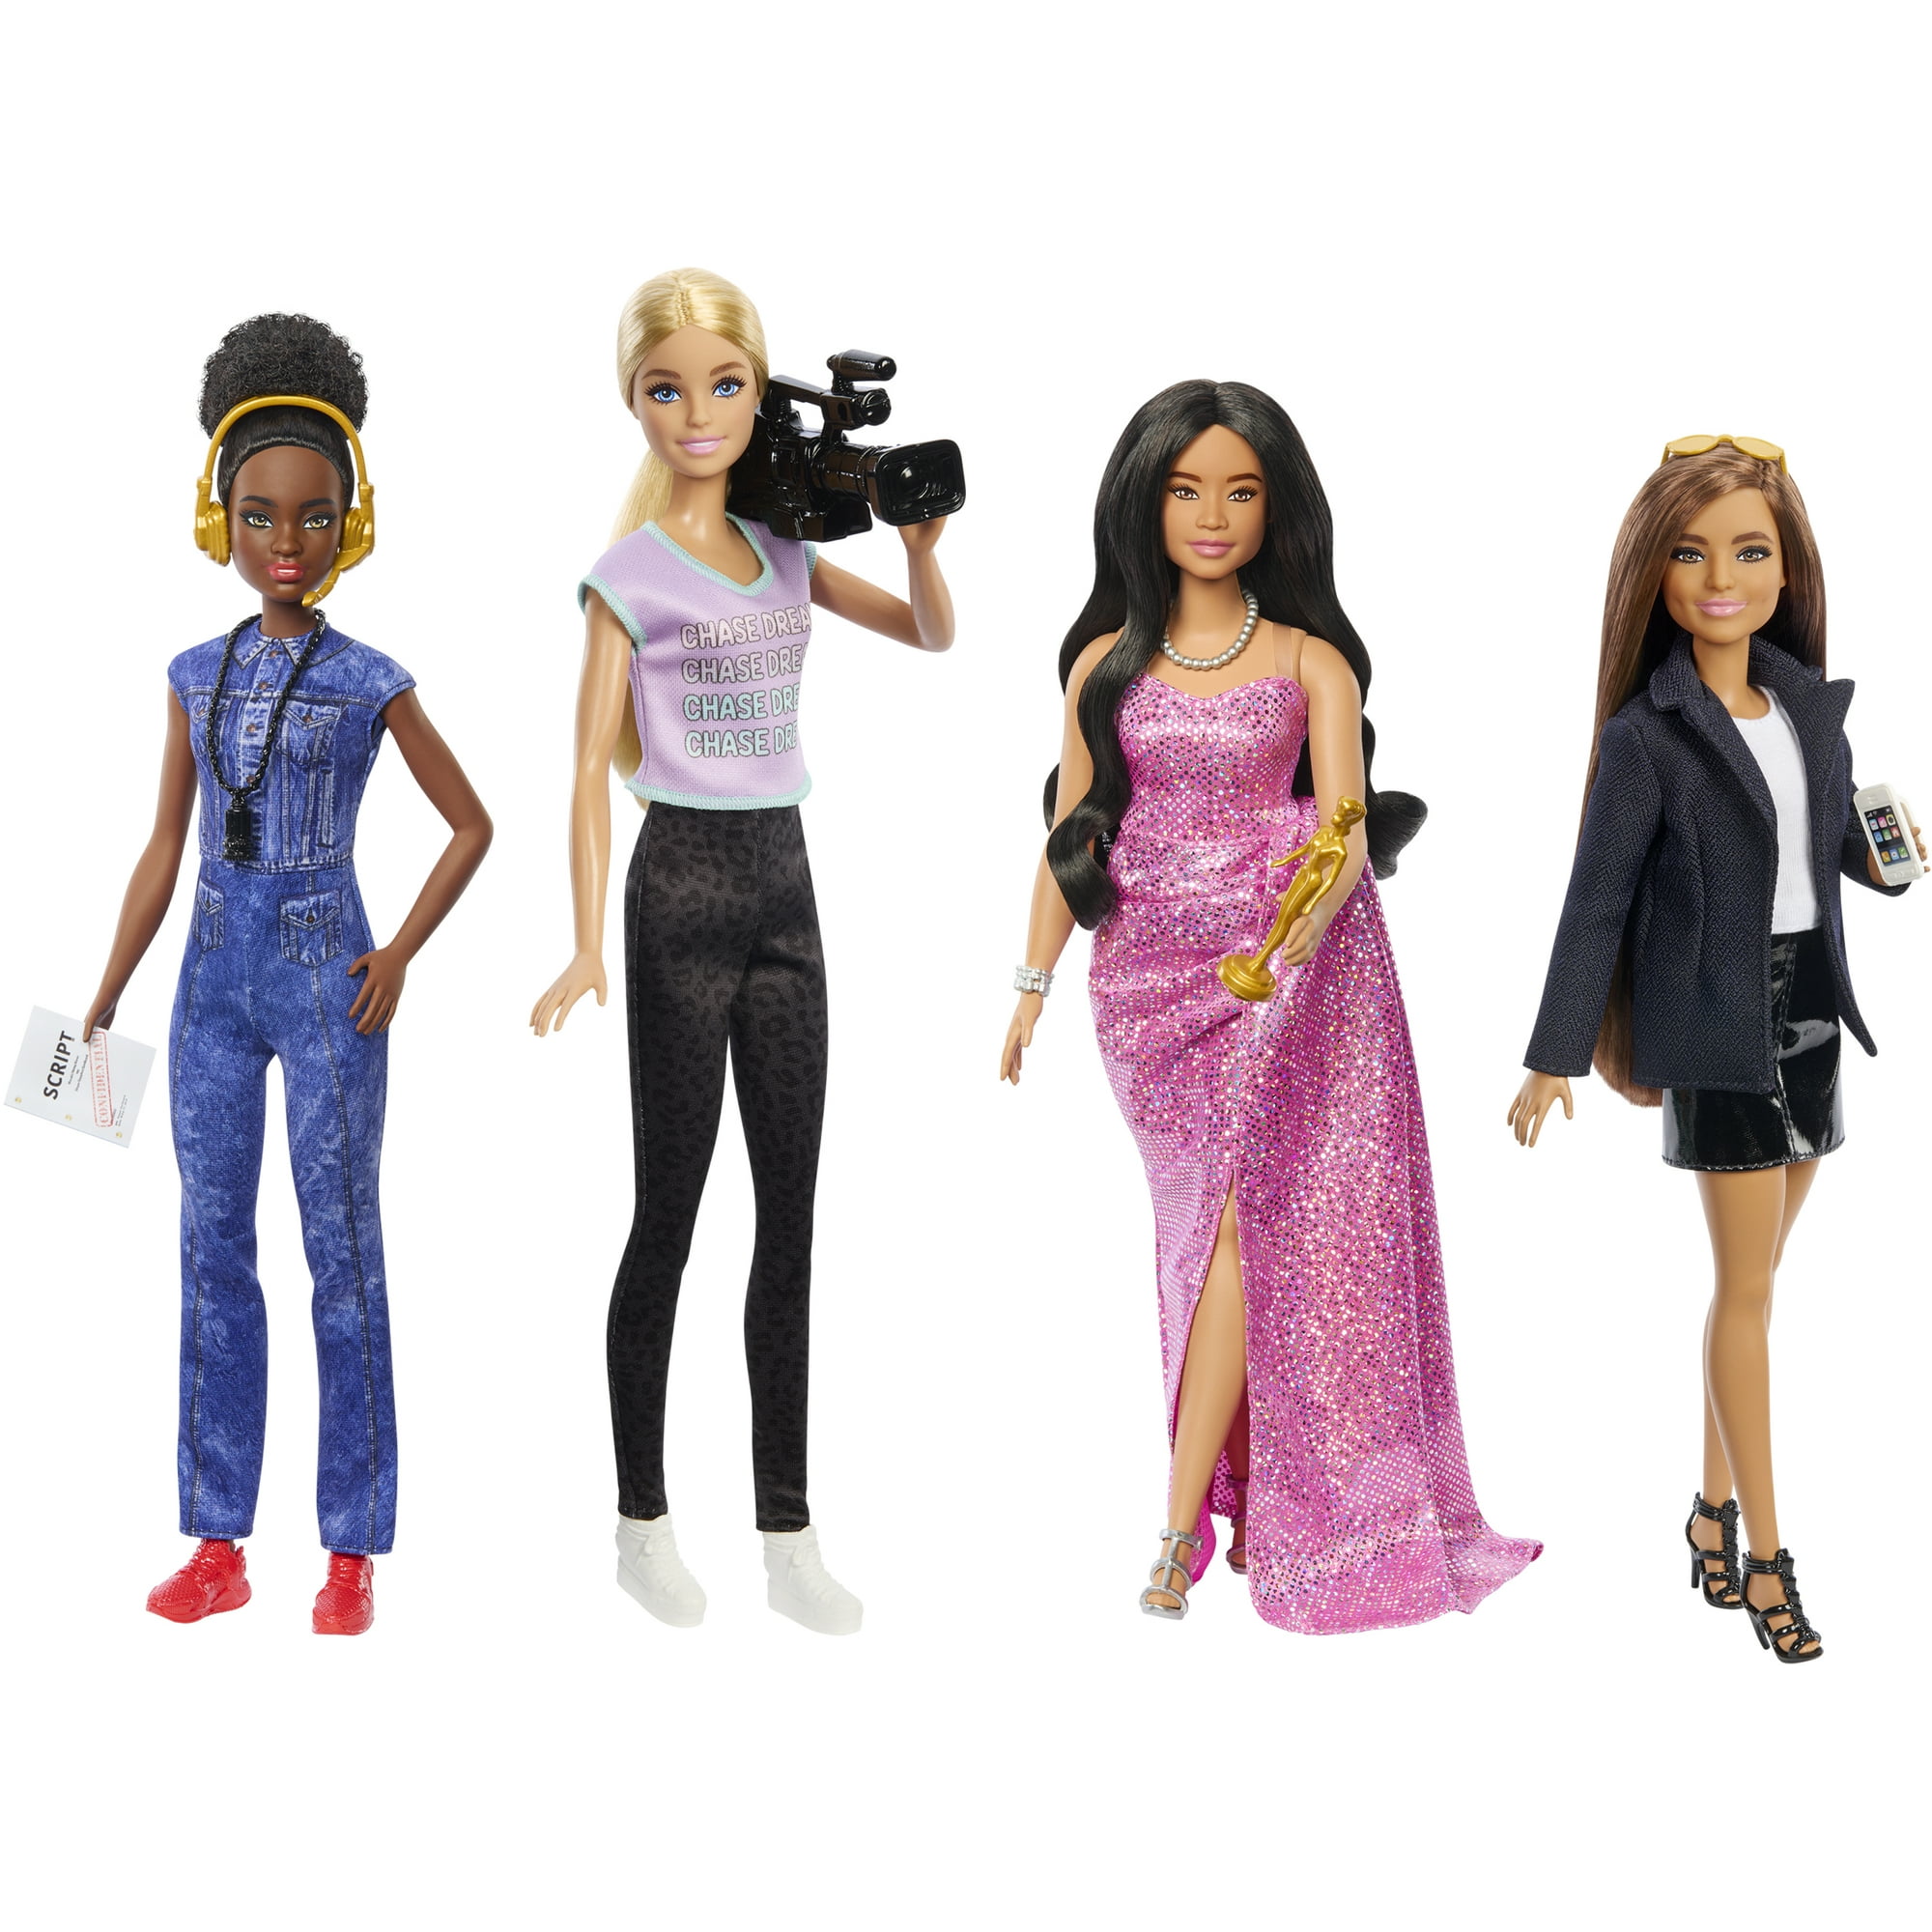 Barbie Careers Women in Film Set of 4 Dolls with Removable Looks and Accessories